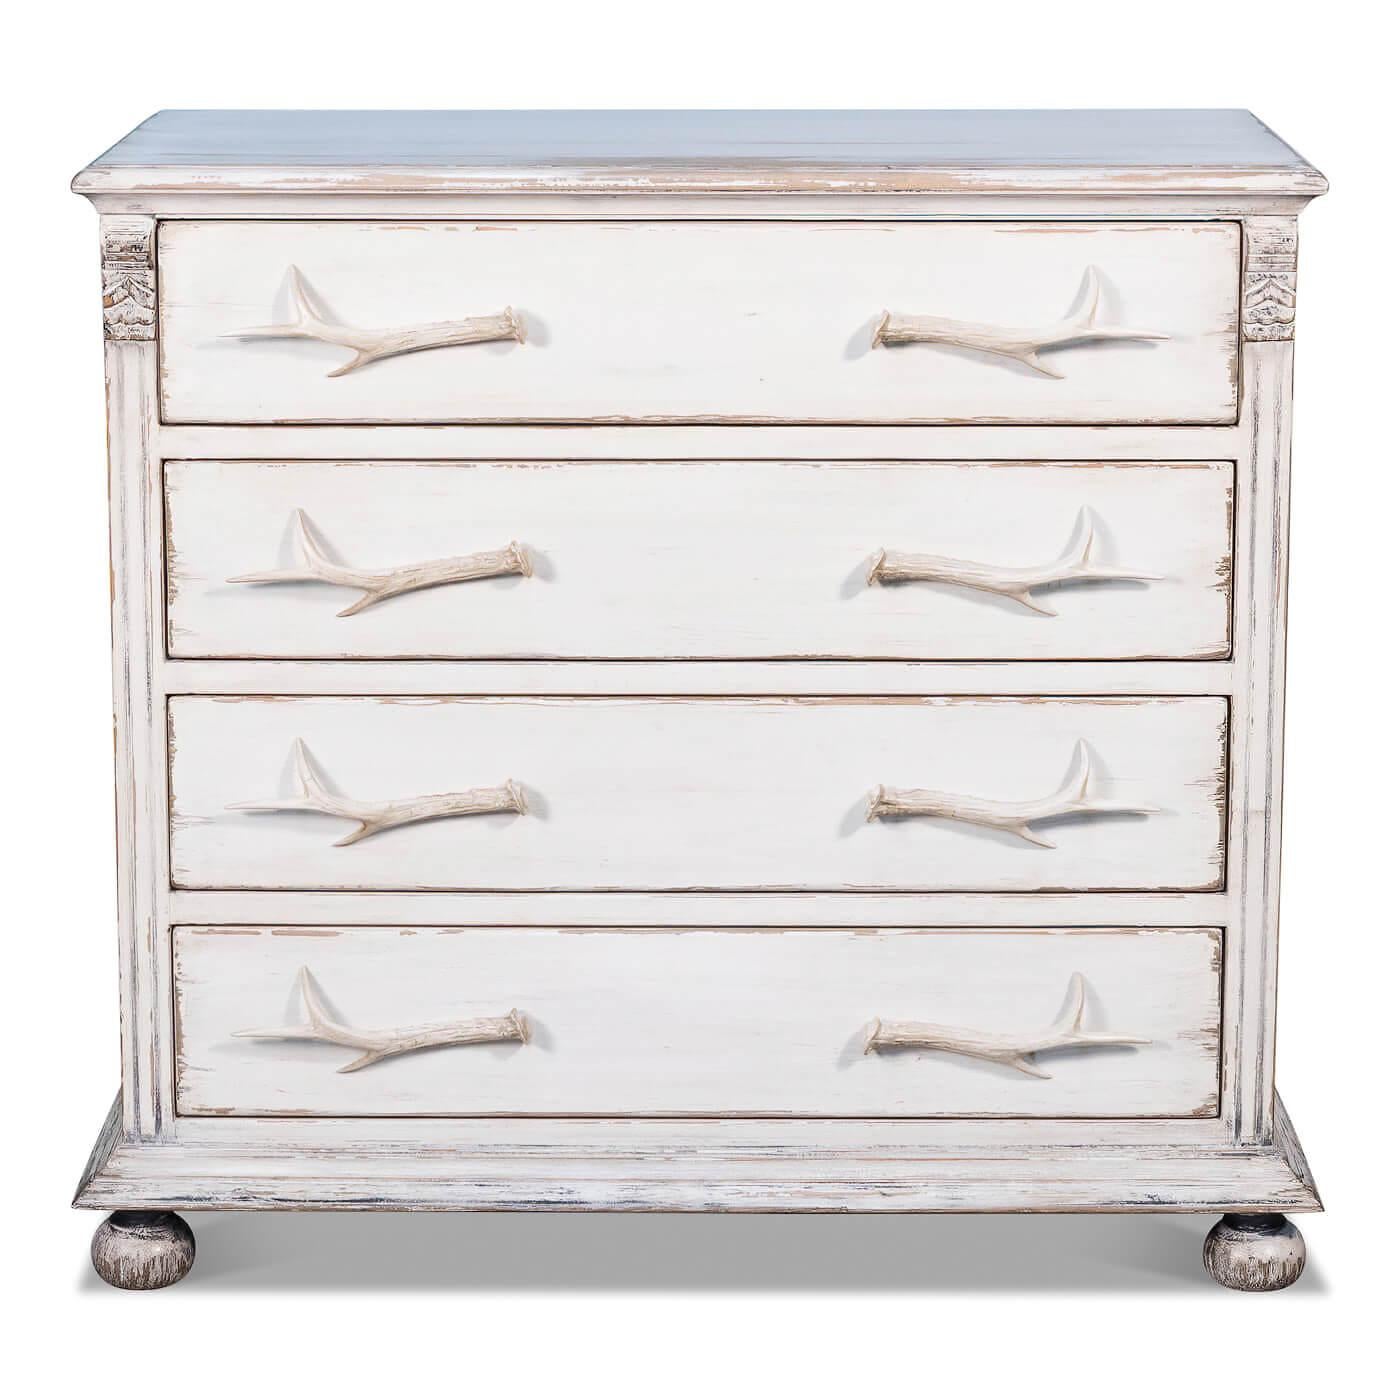 A rustic whitewashed dresser with antler handles. This four-drawer chest is made of reclaimed pine and has been given a hand0rubbed and antiqued painted whitewash finish. 

Dimensions: 44